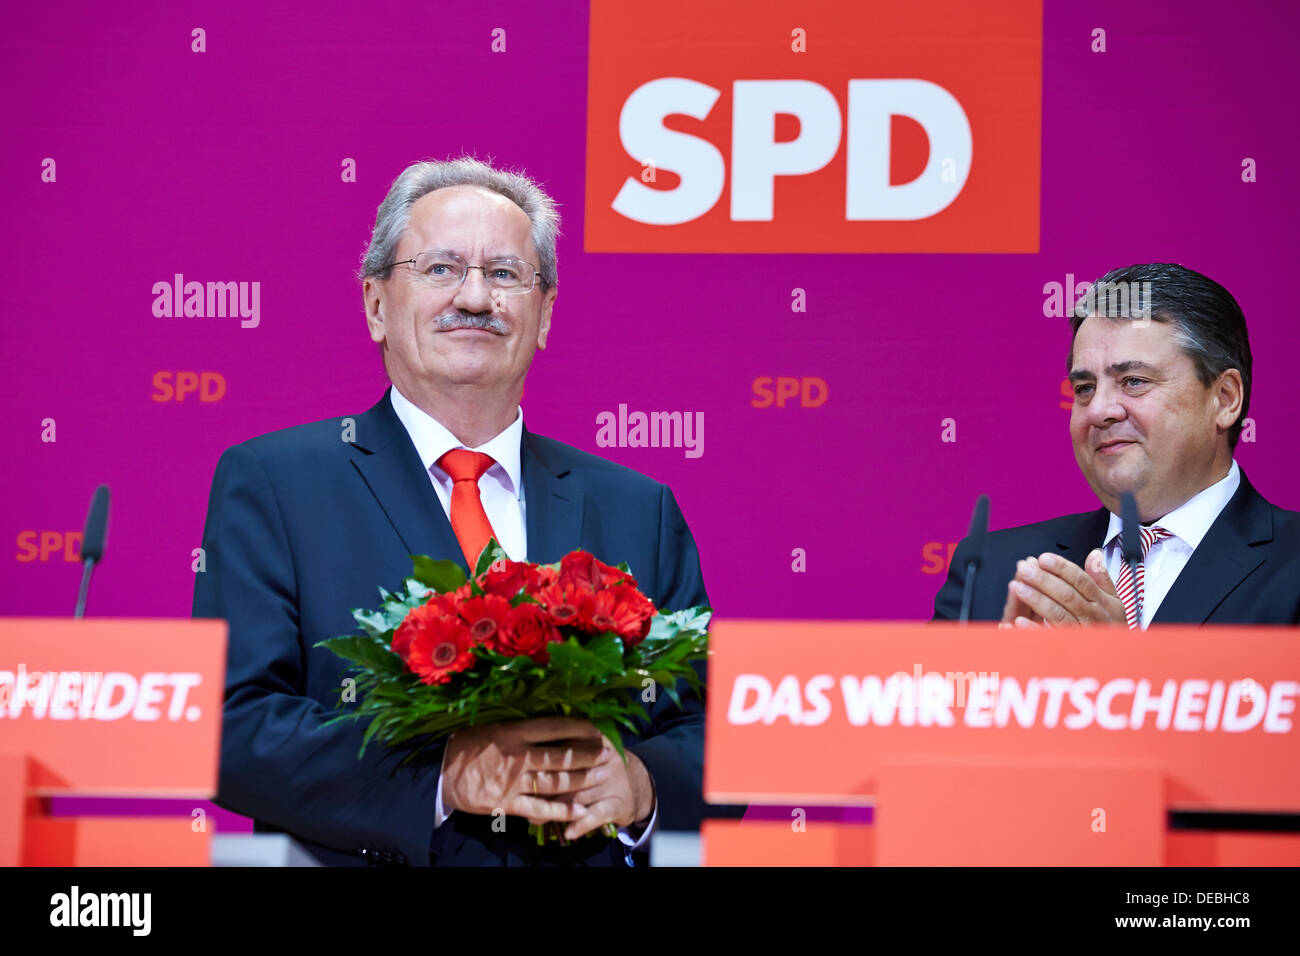 Berlin, Germany. September 16th, 2013. Sigmar Gabriel (SPD) and Christian Ude (SPD), the SPD top candidate in Bavaria gave their statements about the election results a day after the state elections in Bavaria. / Picture: Christian Ude (SPD), Mayor of Munich, recieves flowers from ga in Berlin after the Bavaria elections. Credit:  Reynaldo Chaib Paganelli/Alamy Live News Stock Photo